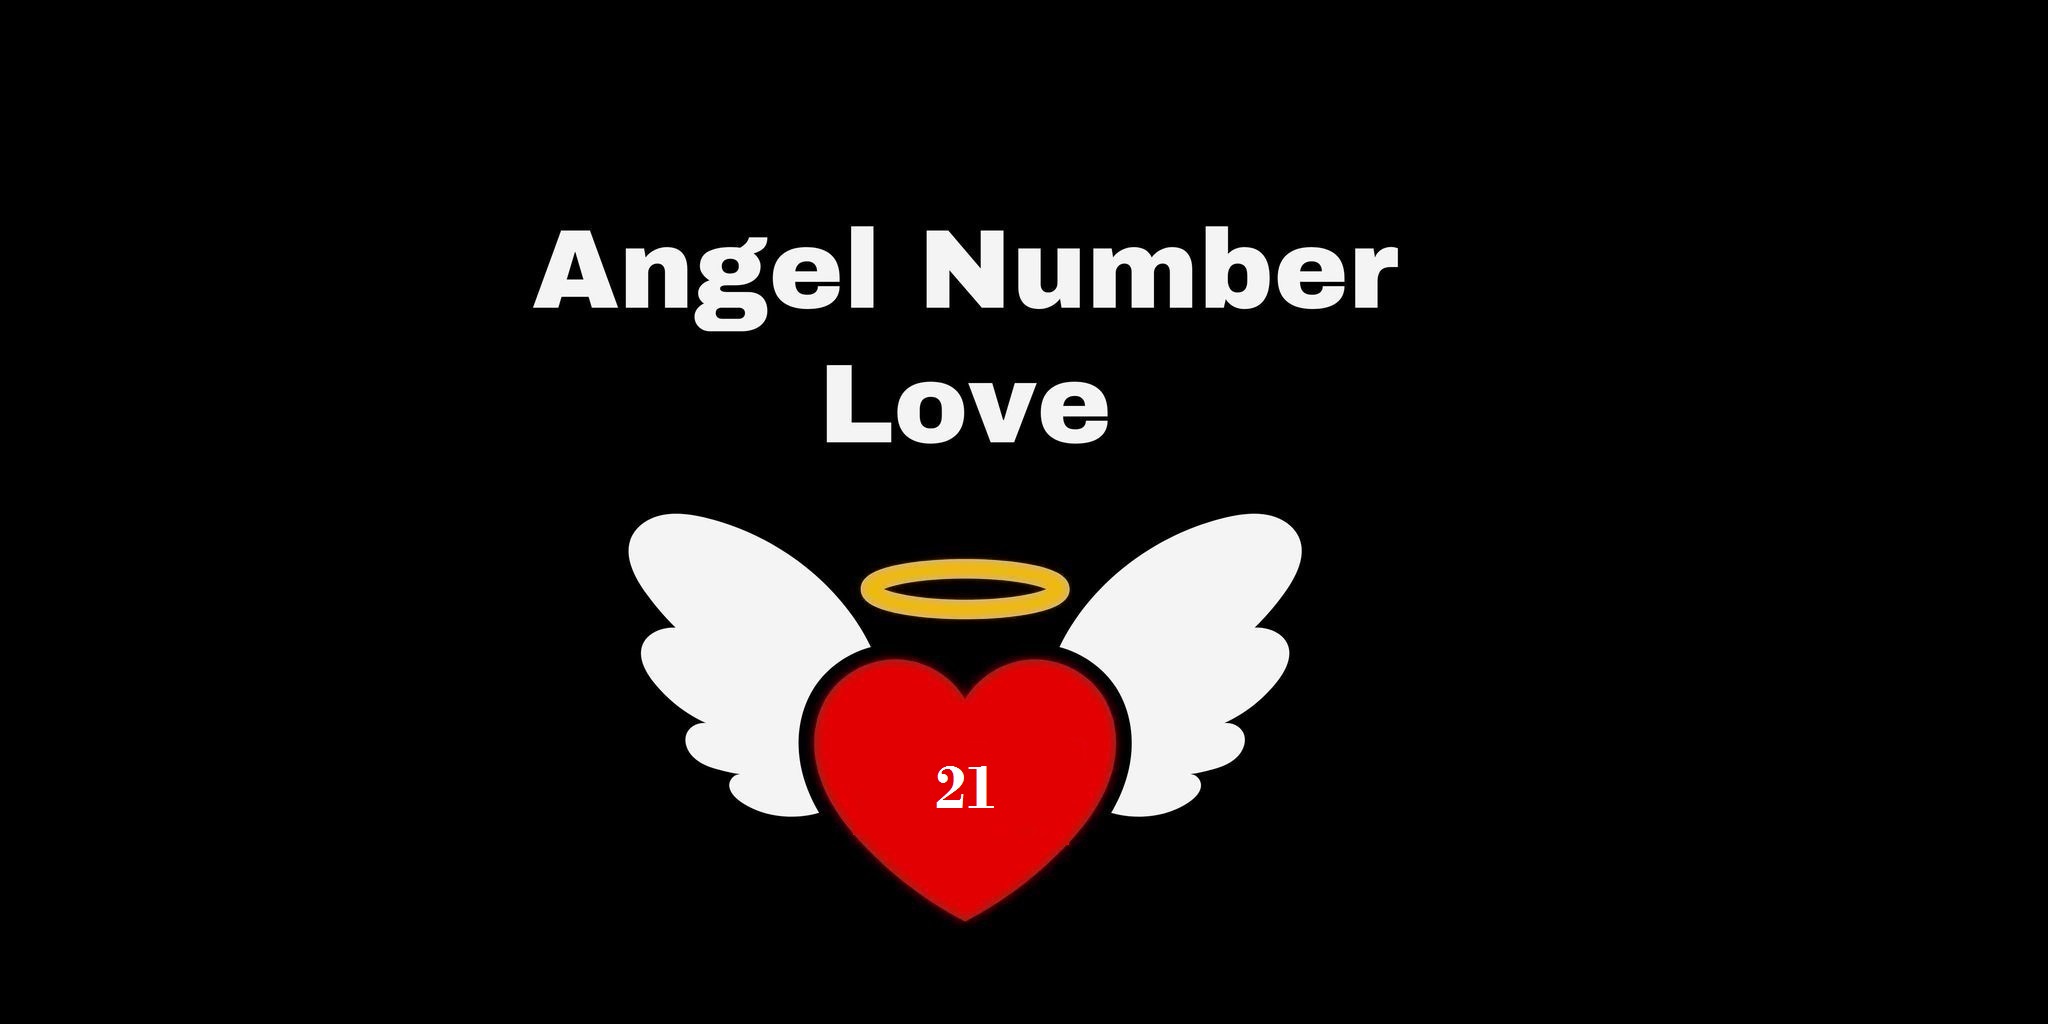 21 Angel Number Meaning In Love